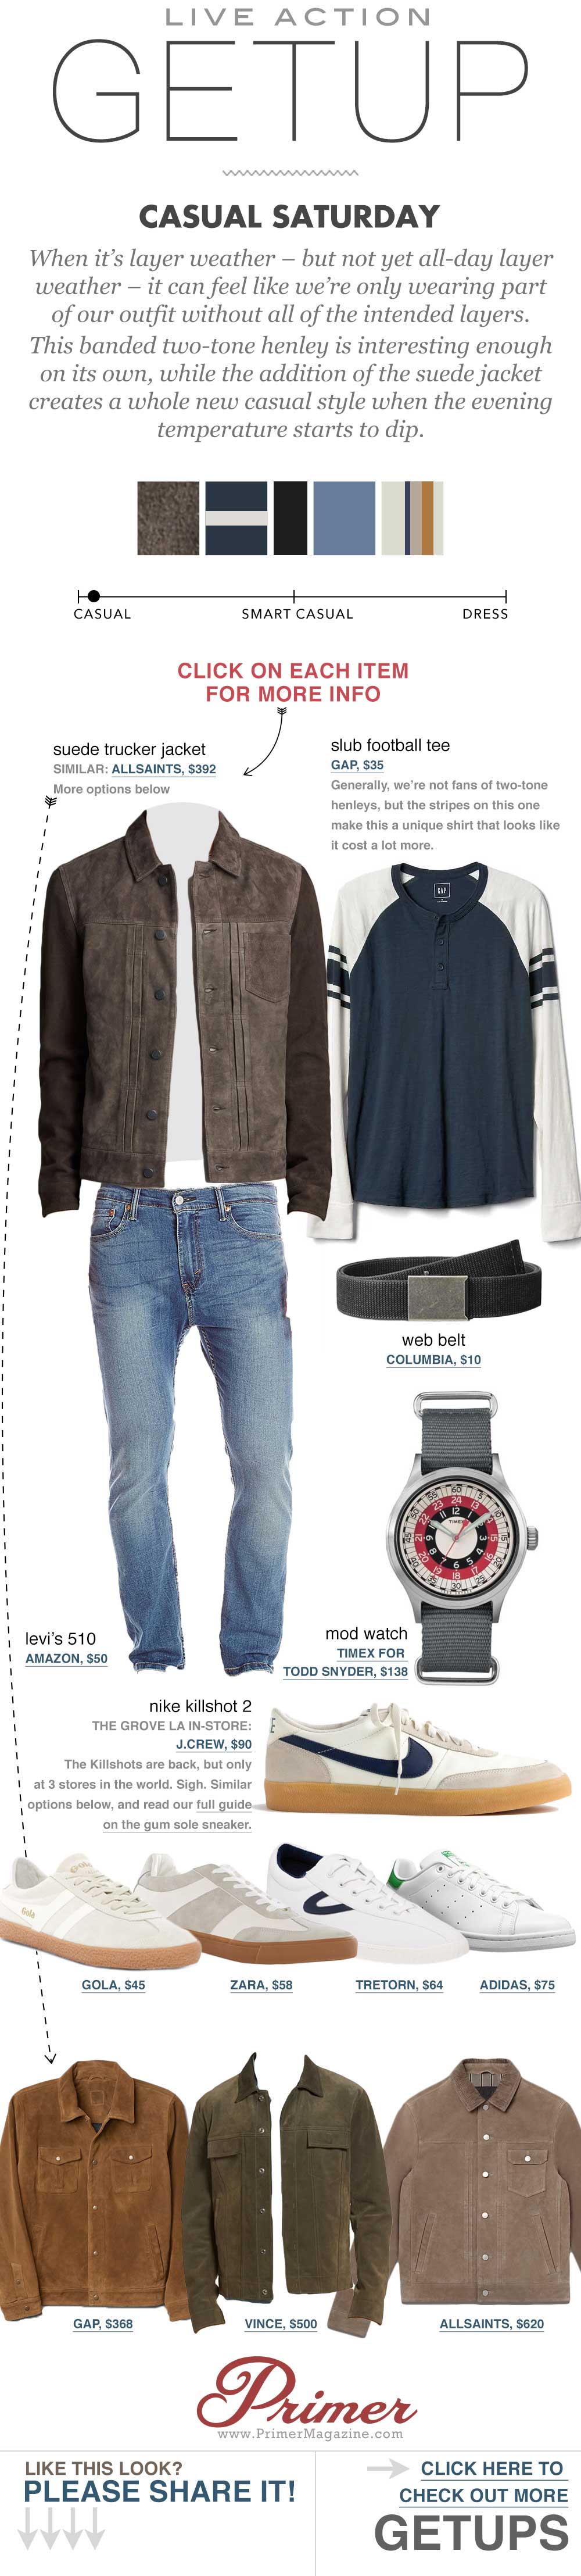 casual men outfit inspiration fashion The Getup